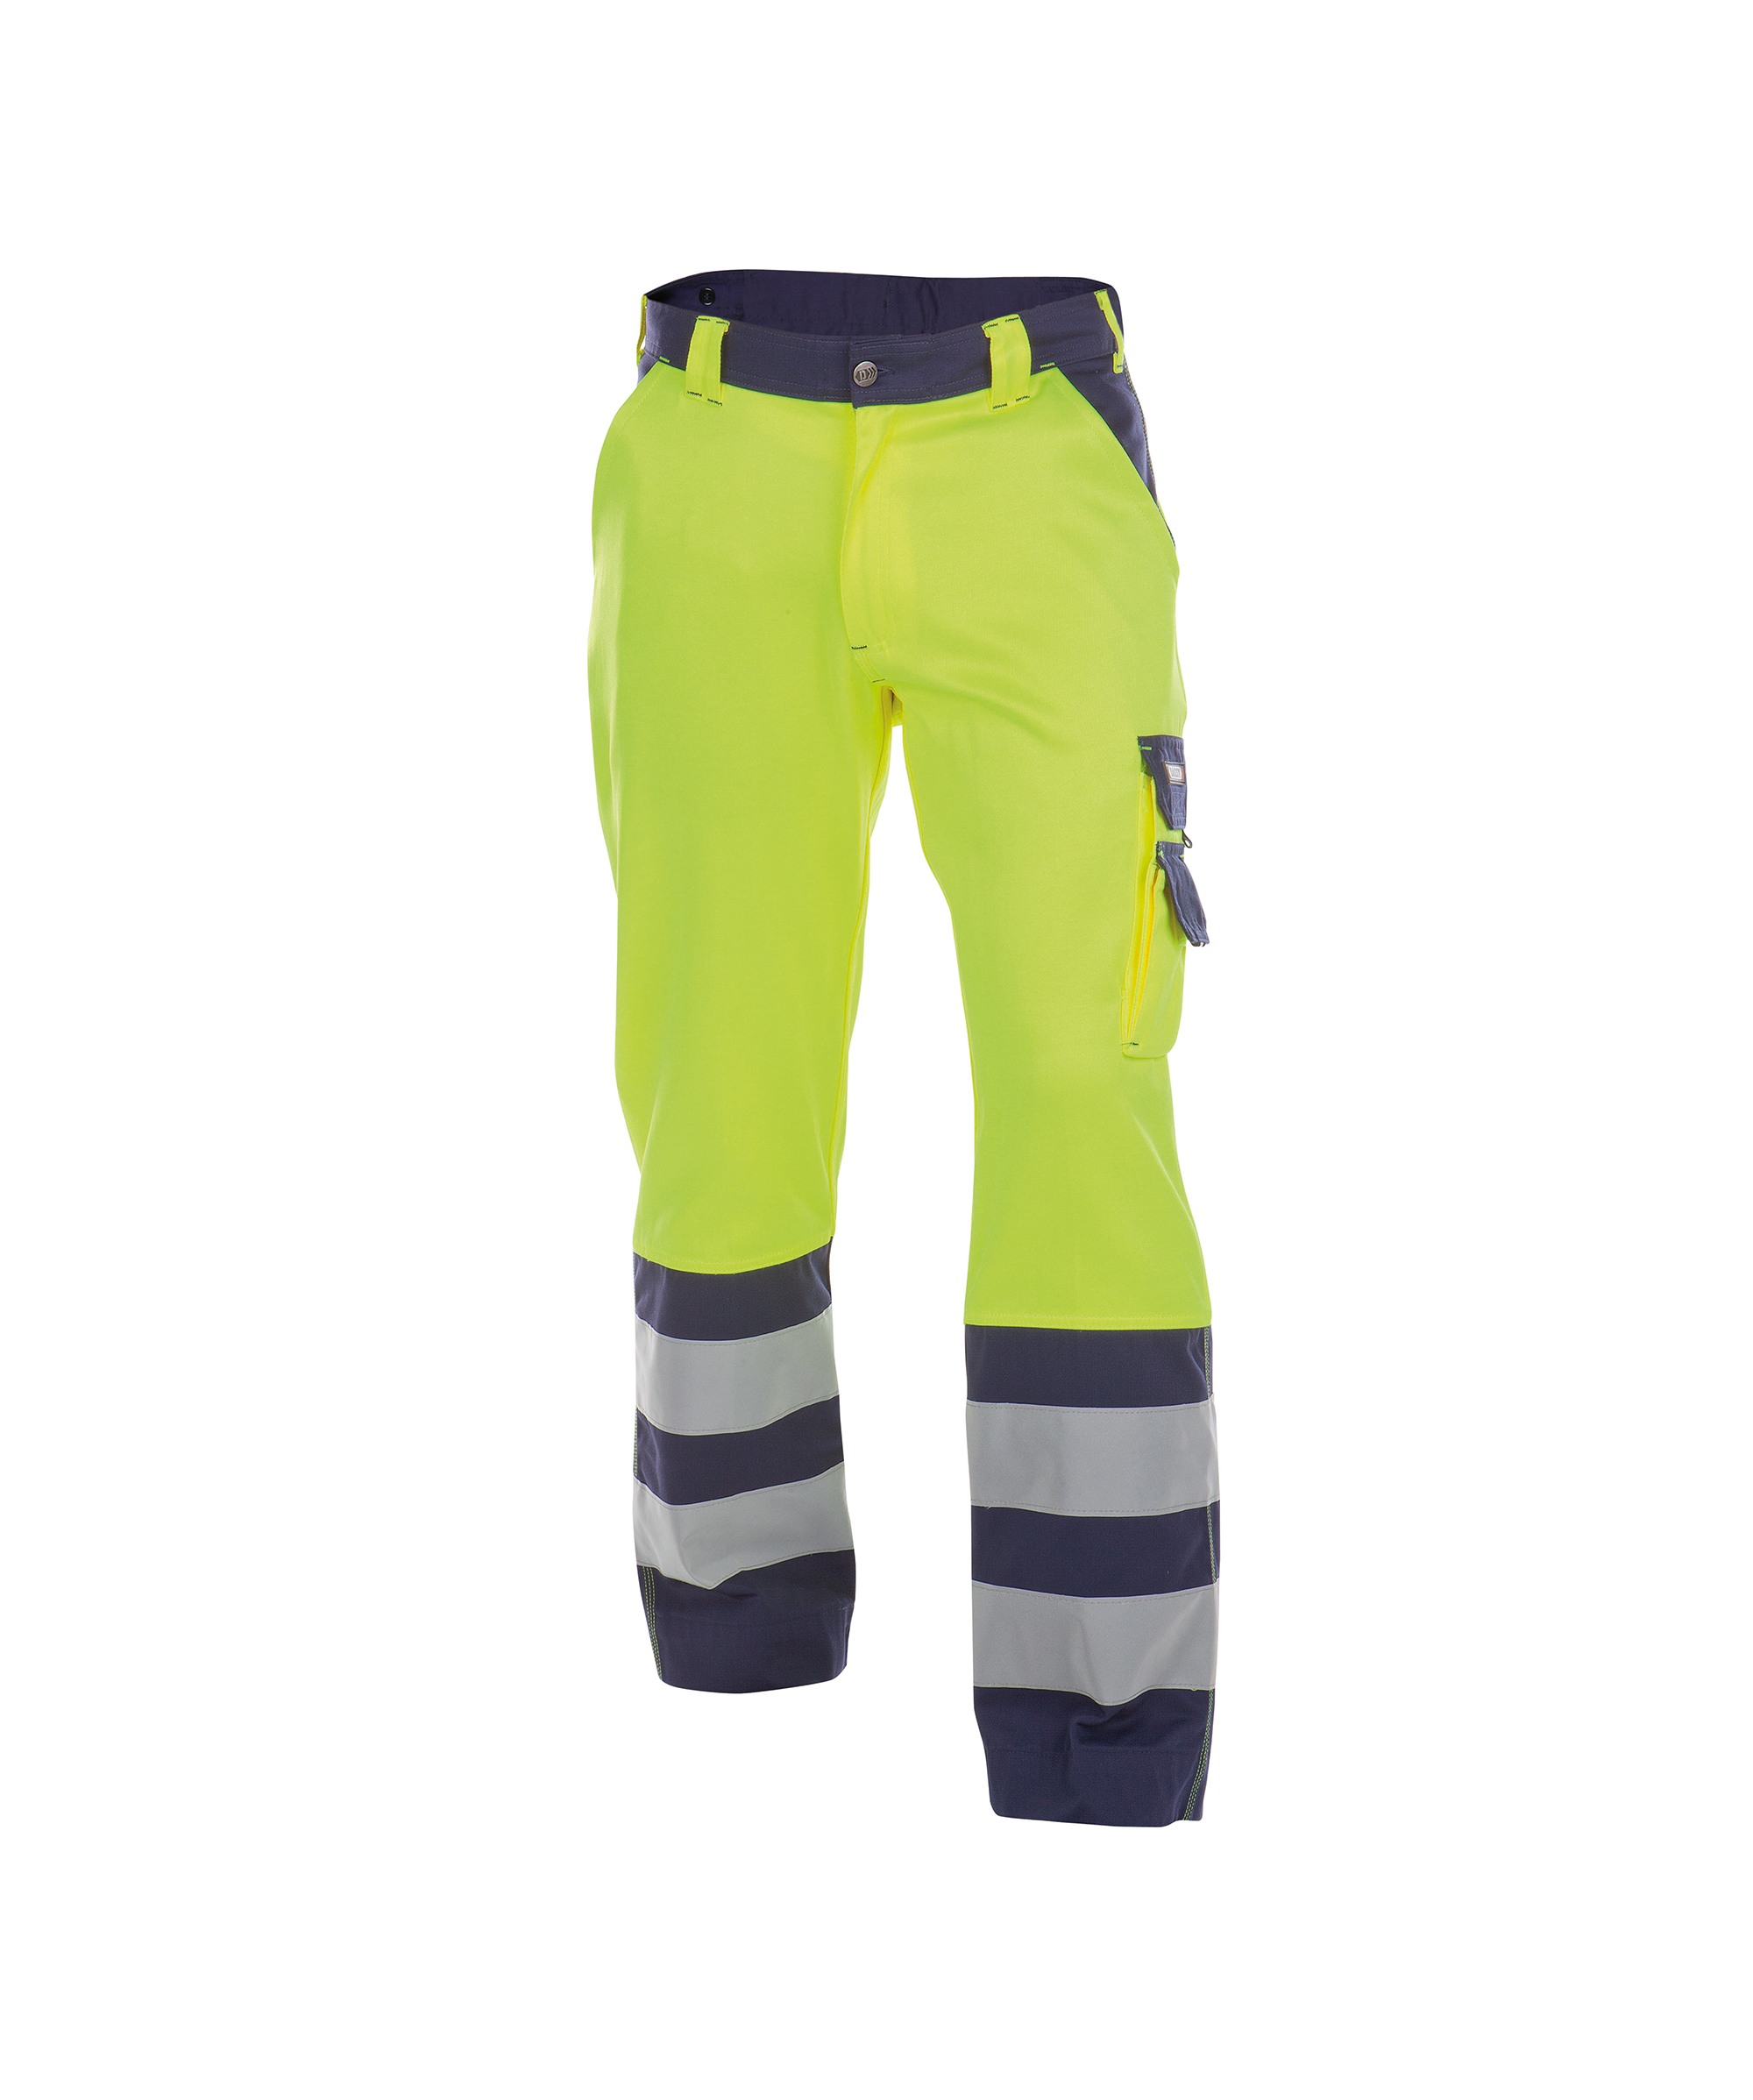 lancaster_high-visibility-work-trousers_fluo-yellow-navy_front.jpg